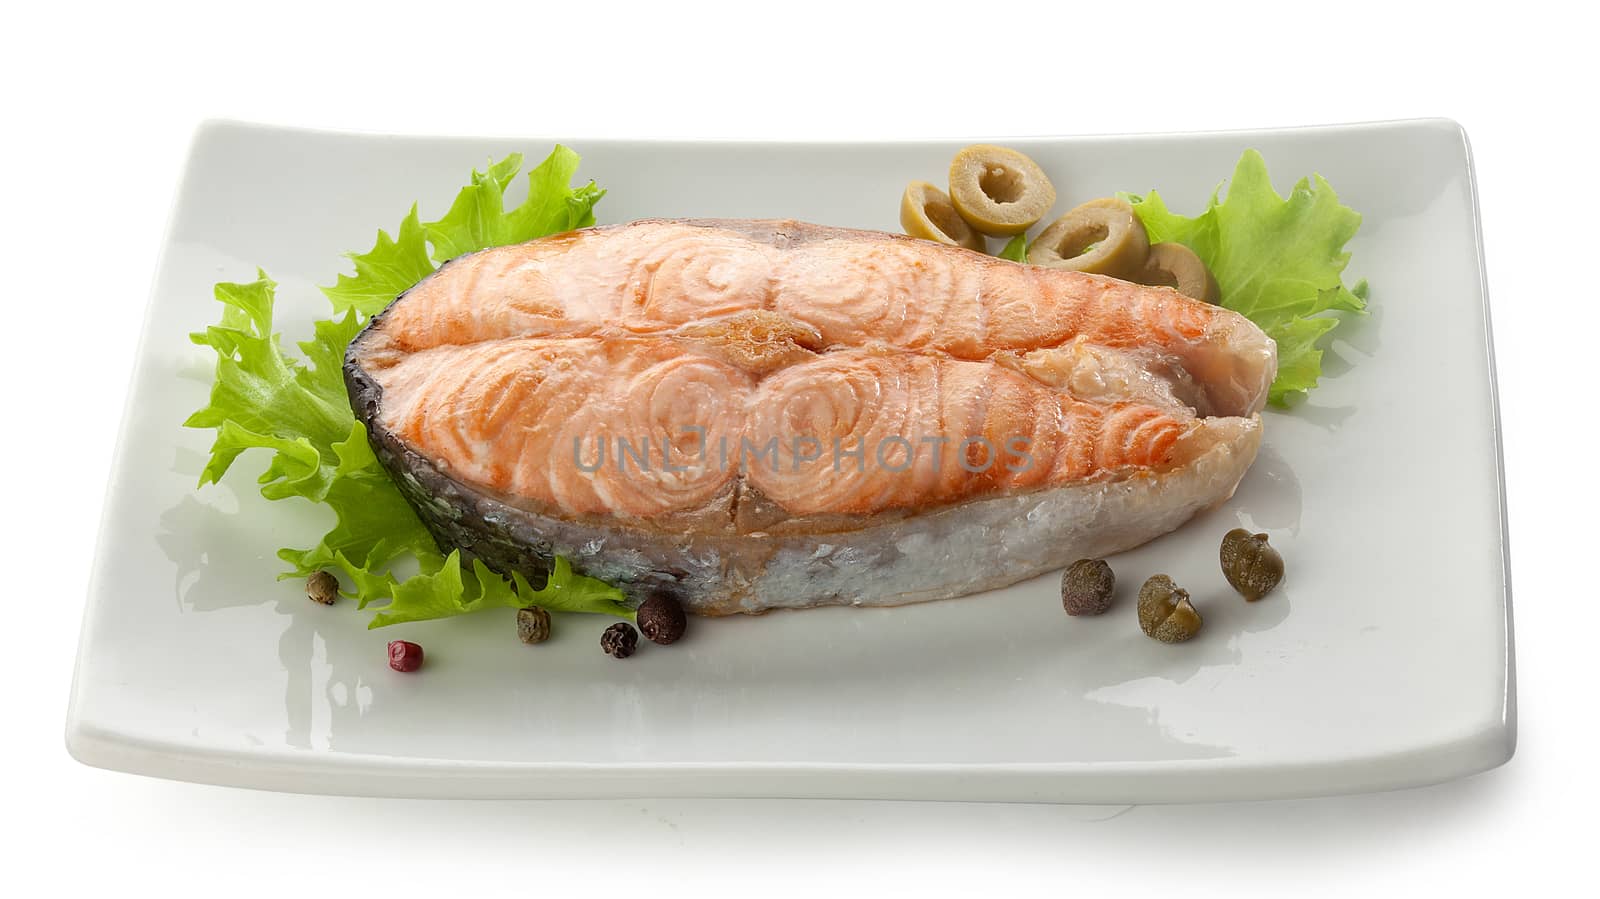 Baked steak of salmon with vegetables, lettuce and pepper by Angorius